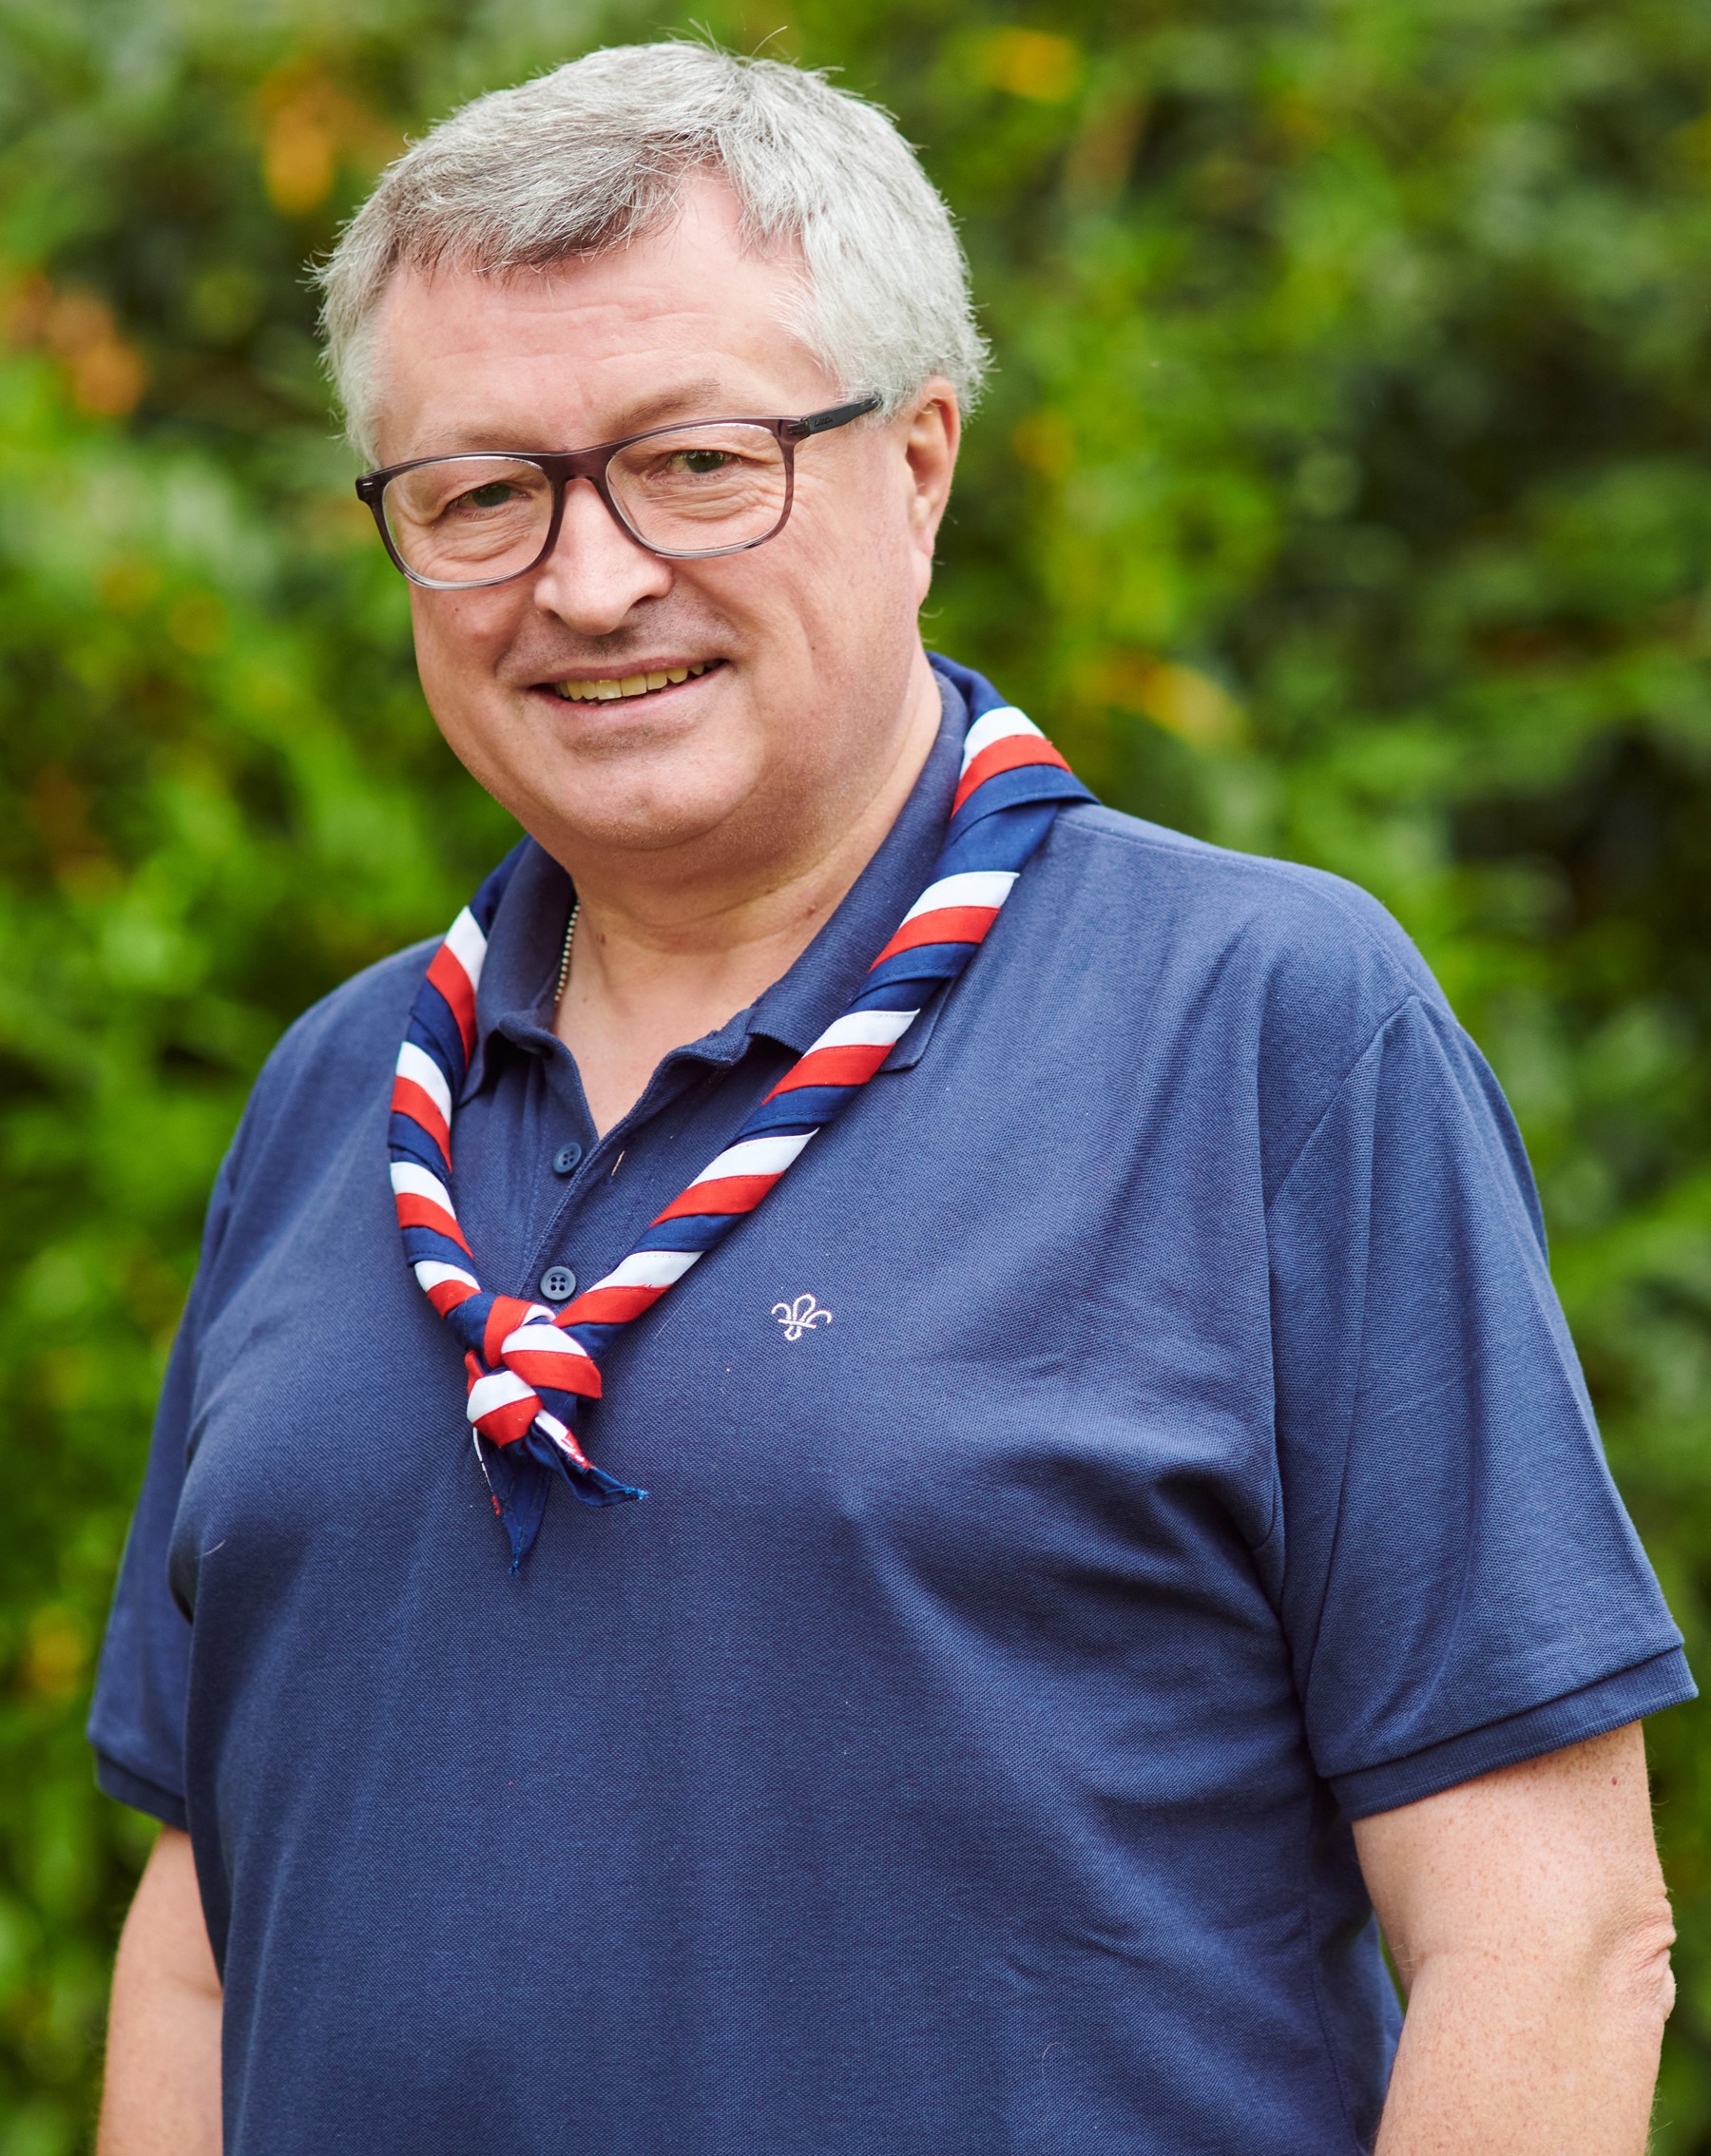 Graham Haddock smiling at the camera while wearing glasses, a navy Scouts polo shirt and stripy scarf